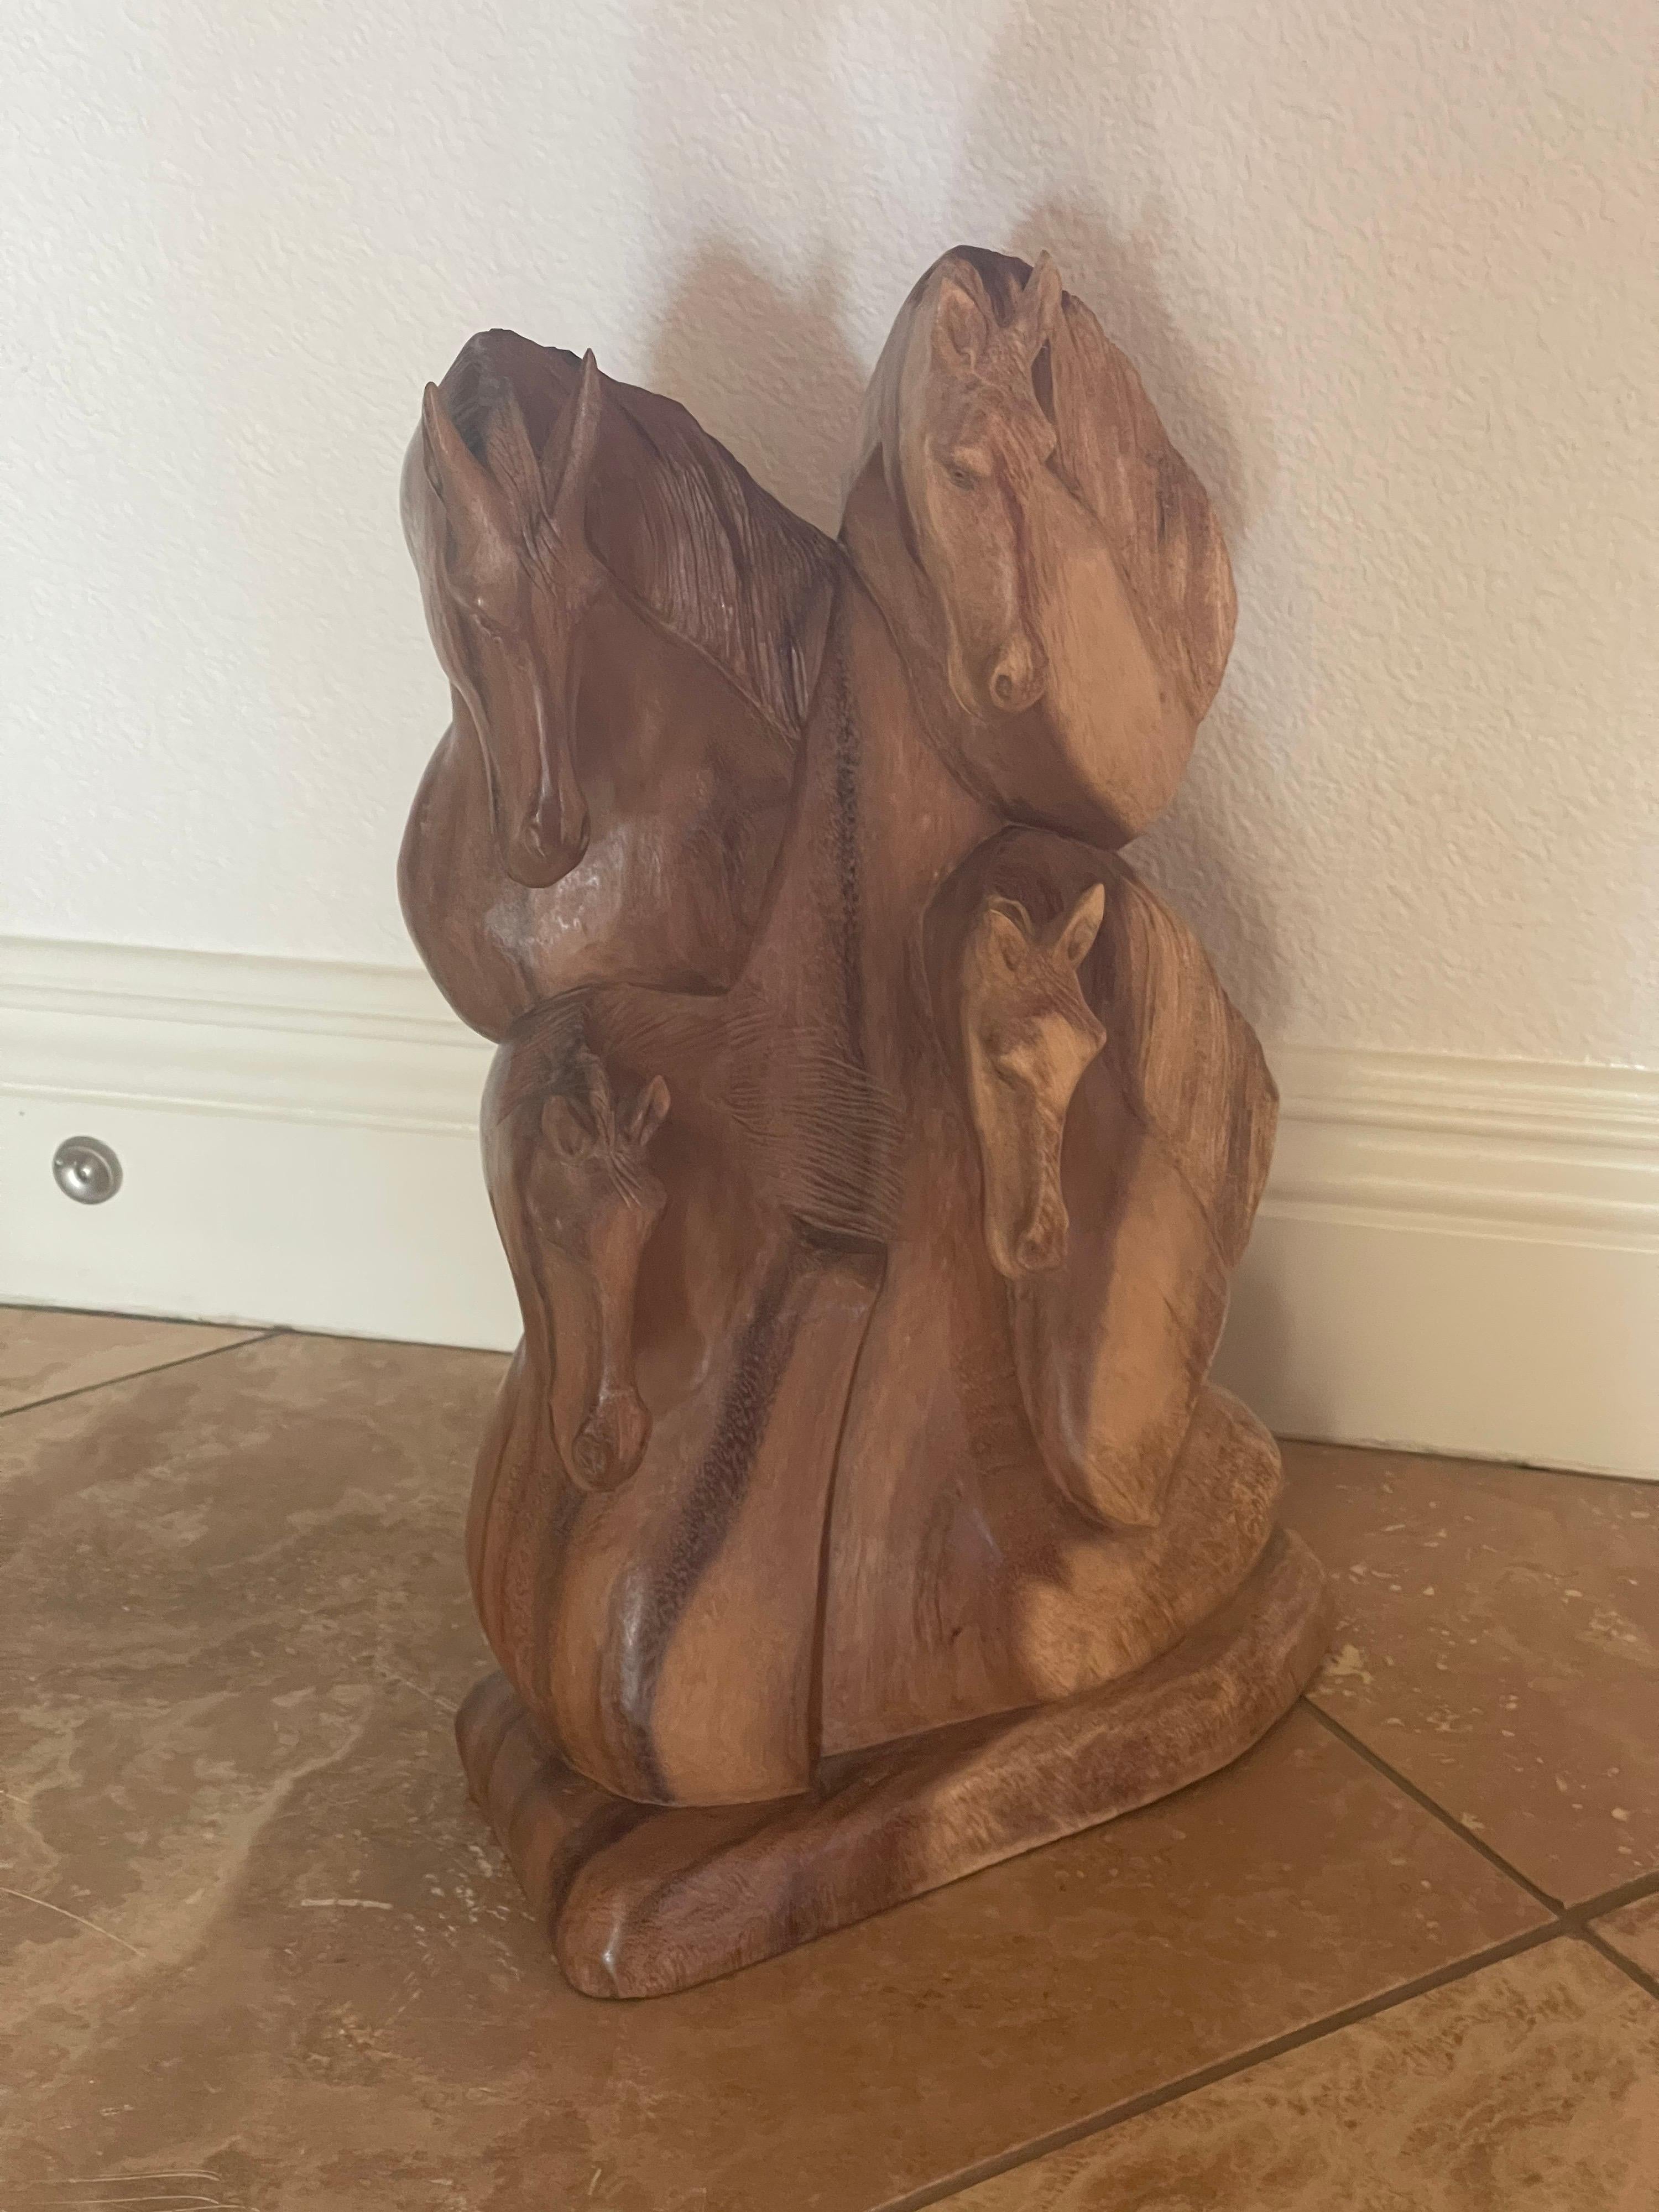 North American Hand Carved Hardwood Four Horse Head Sculpture For Sale